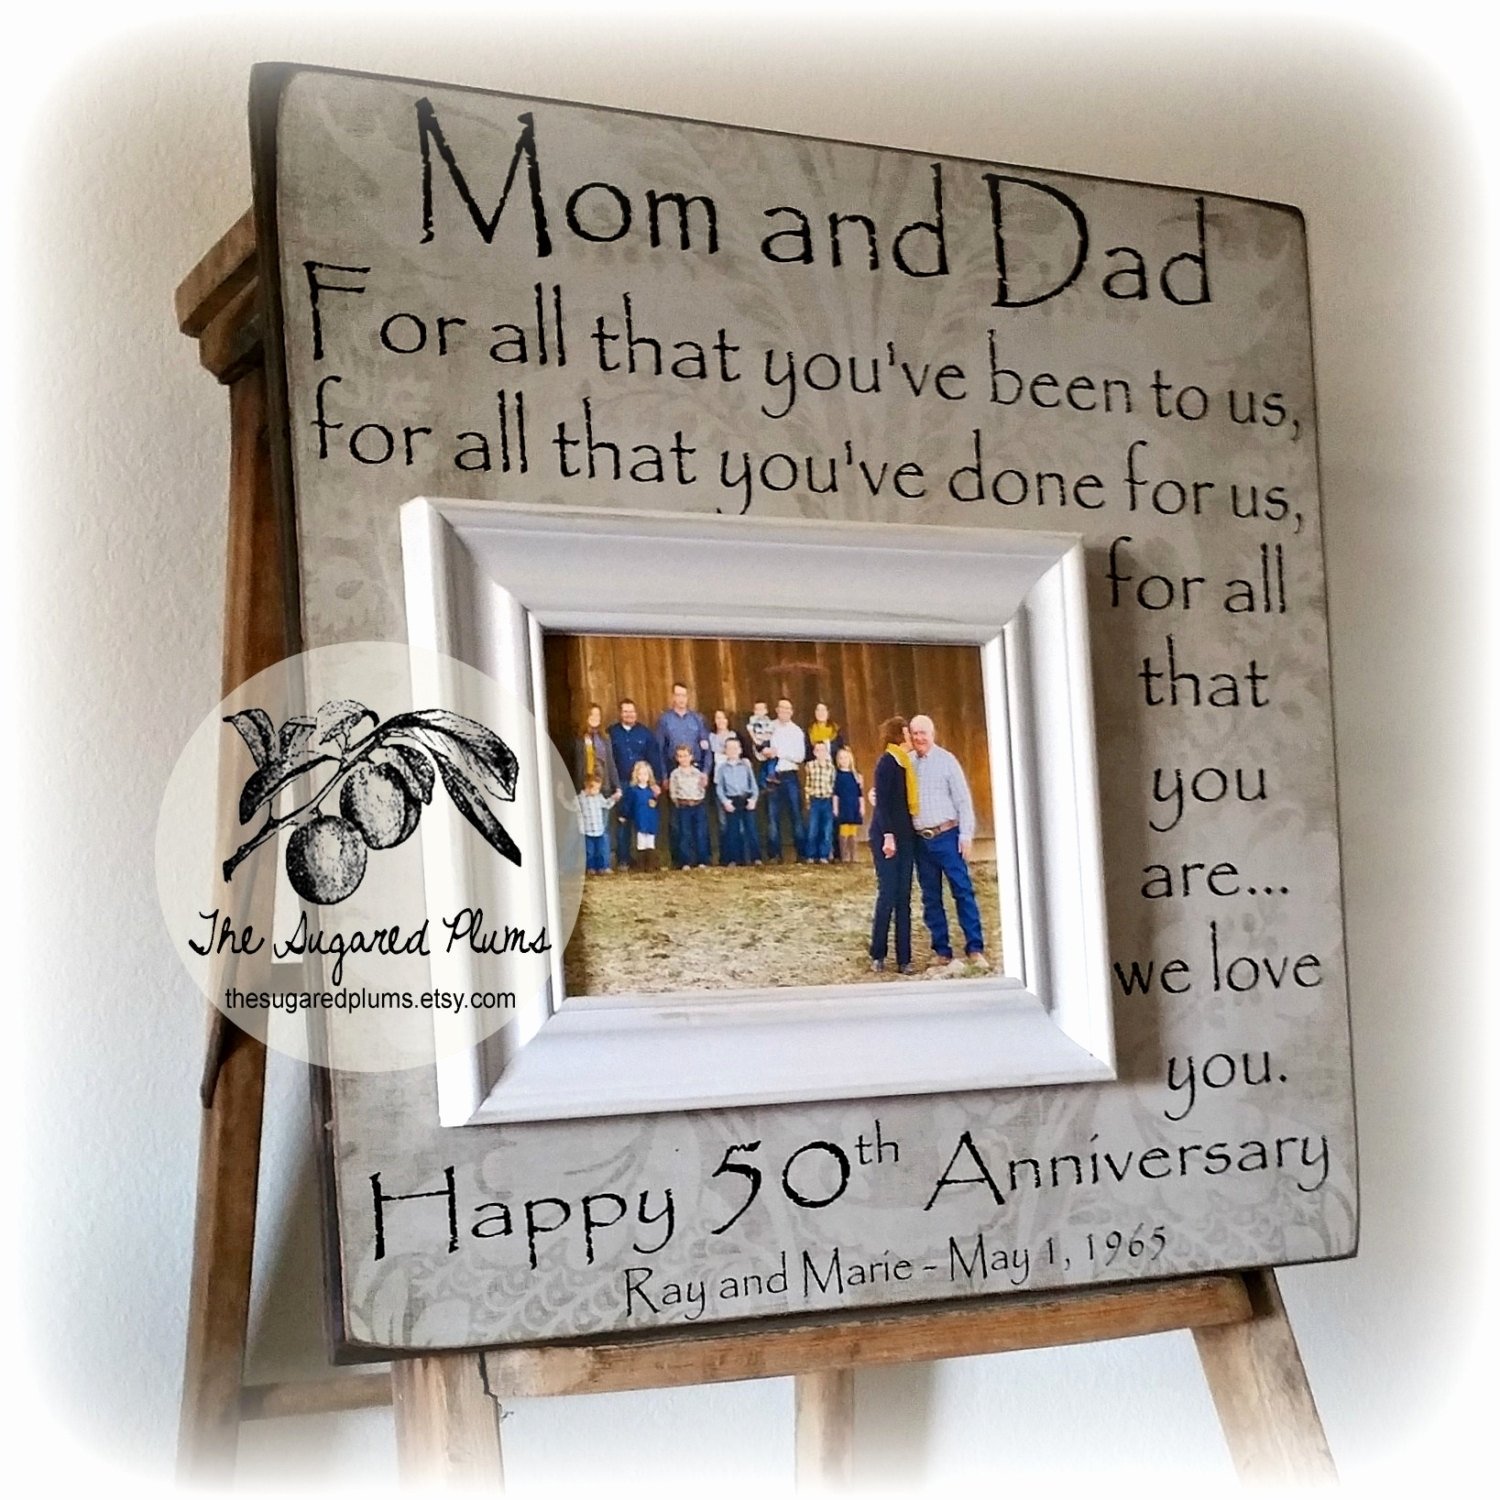 10 Lovable Anniversary Gifts For Parents Ideas wedding gift ideas from parents of the bride elegant 50th 2022